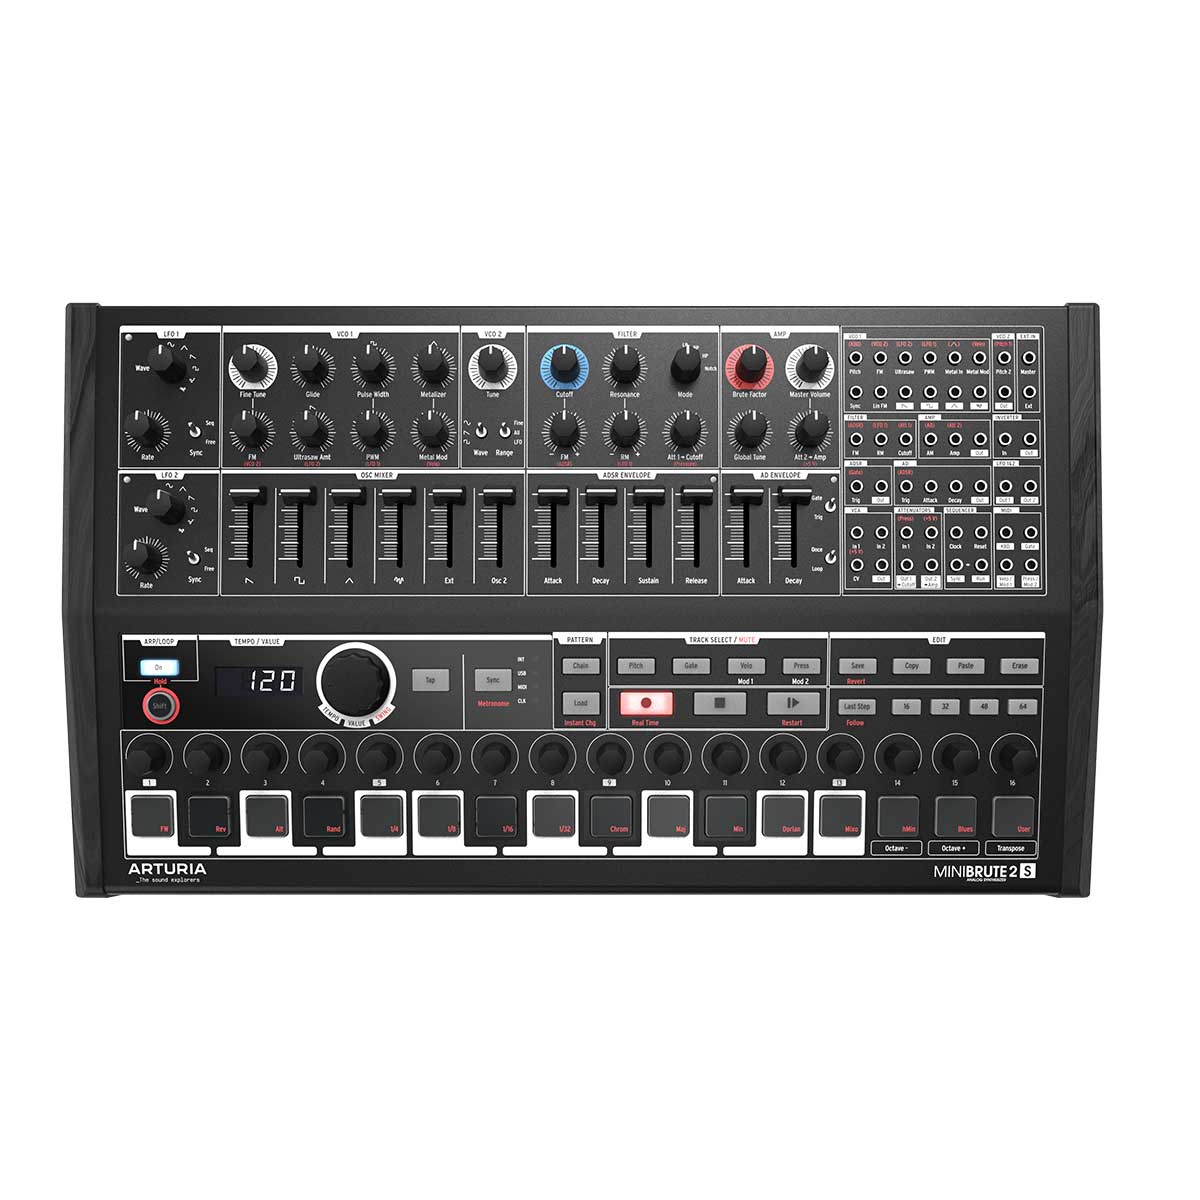 Arturia Minibrute 2 S synth sequencer LTD black/noir with FREE bonus V-Collection 8